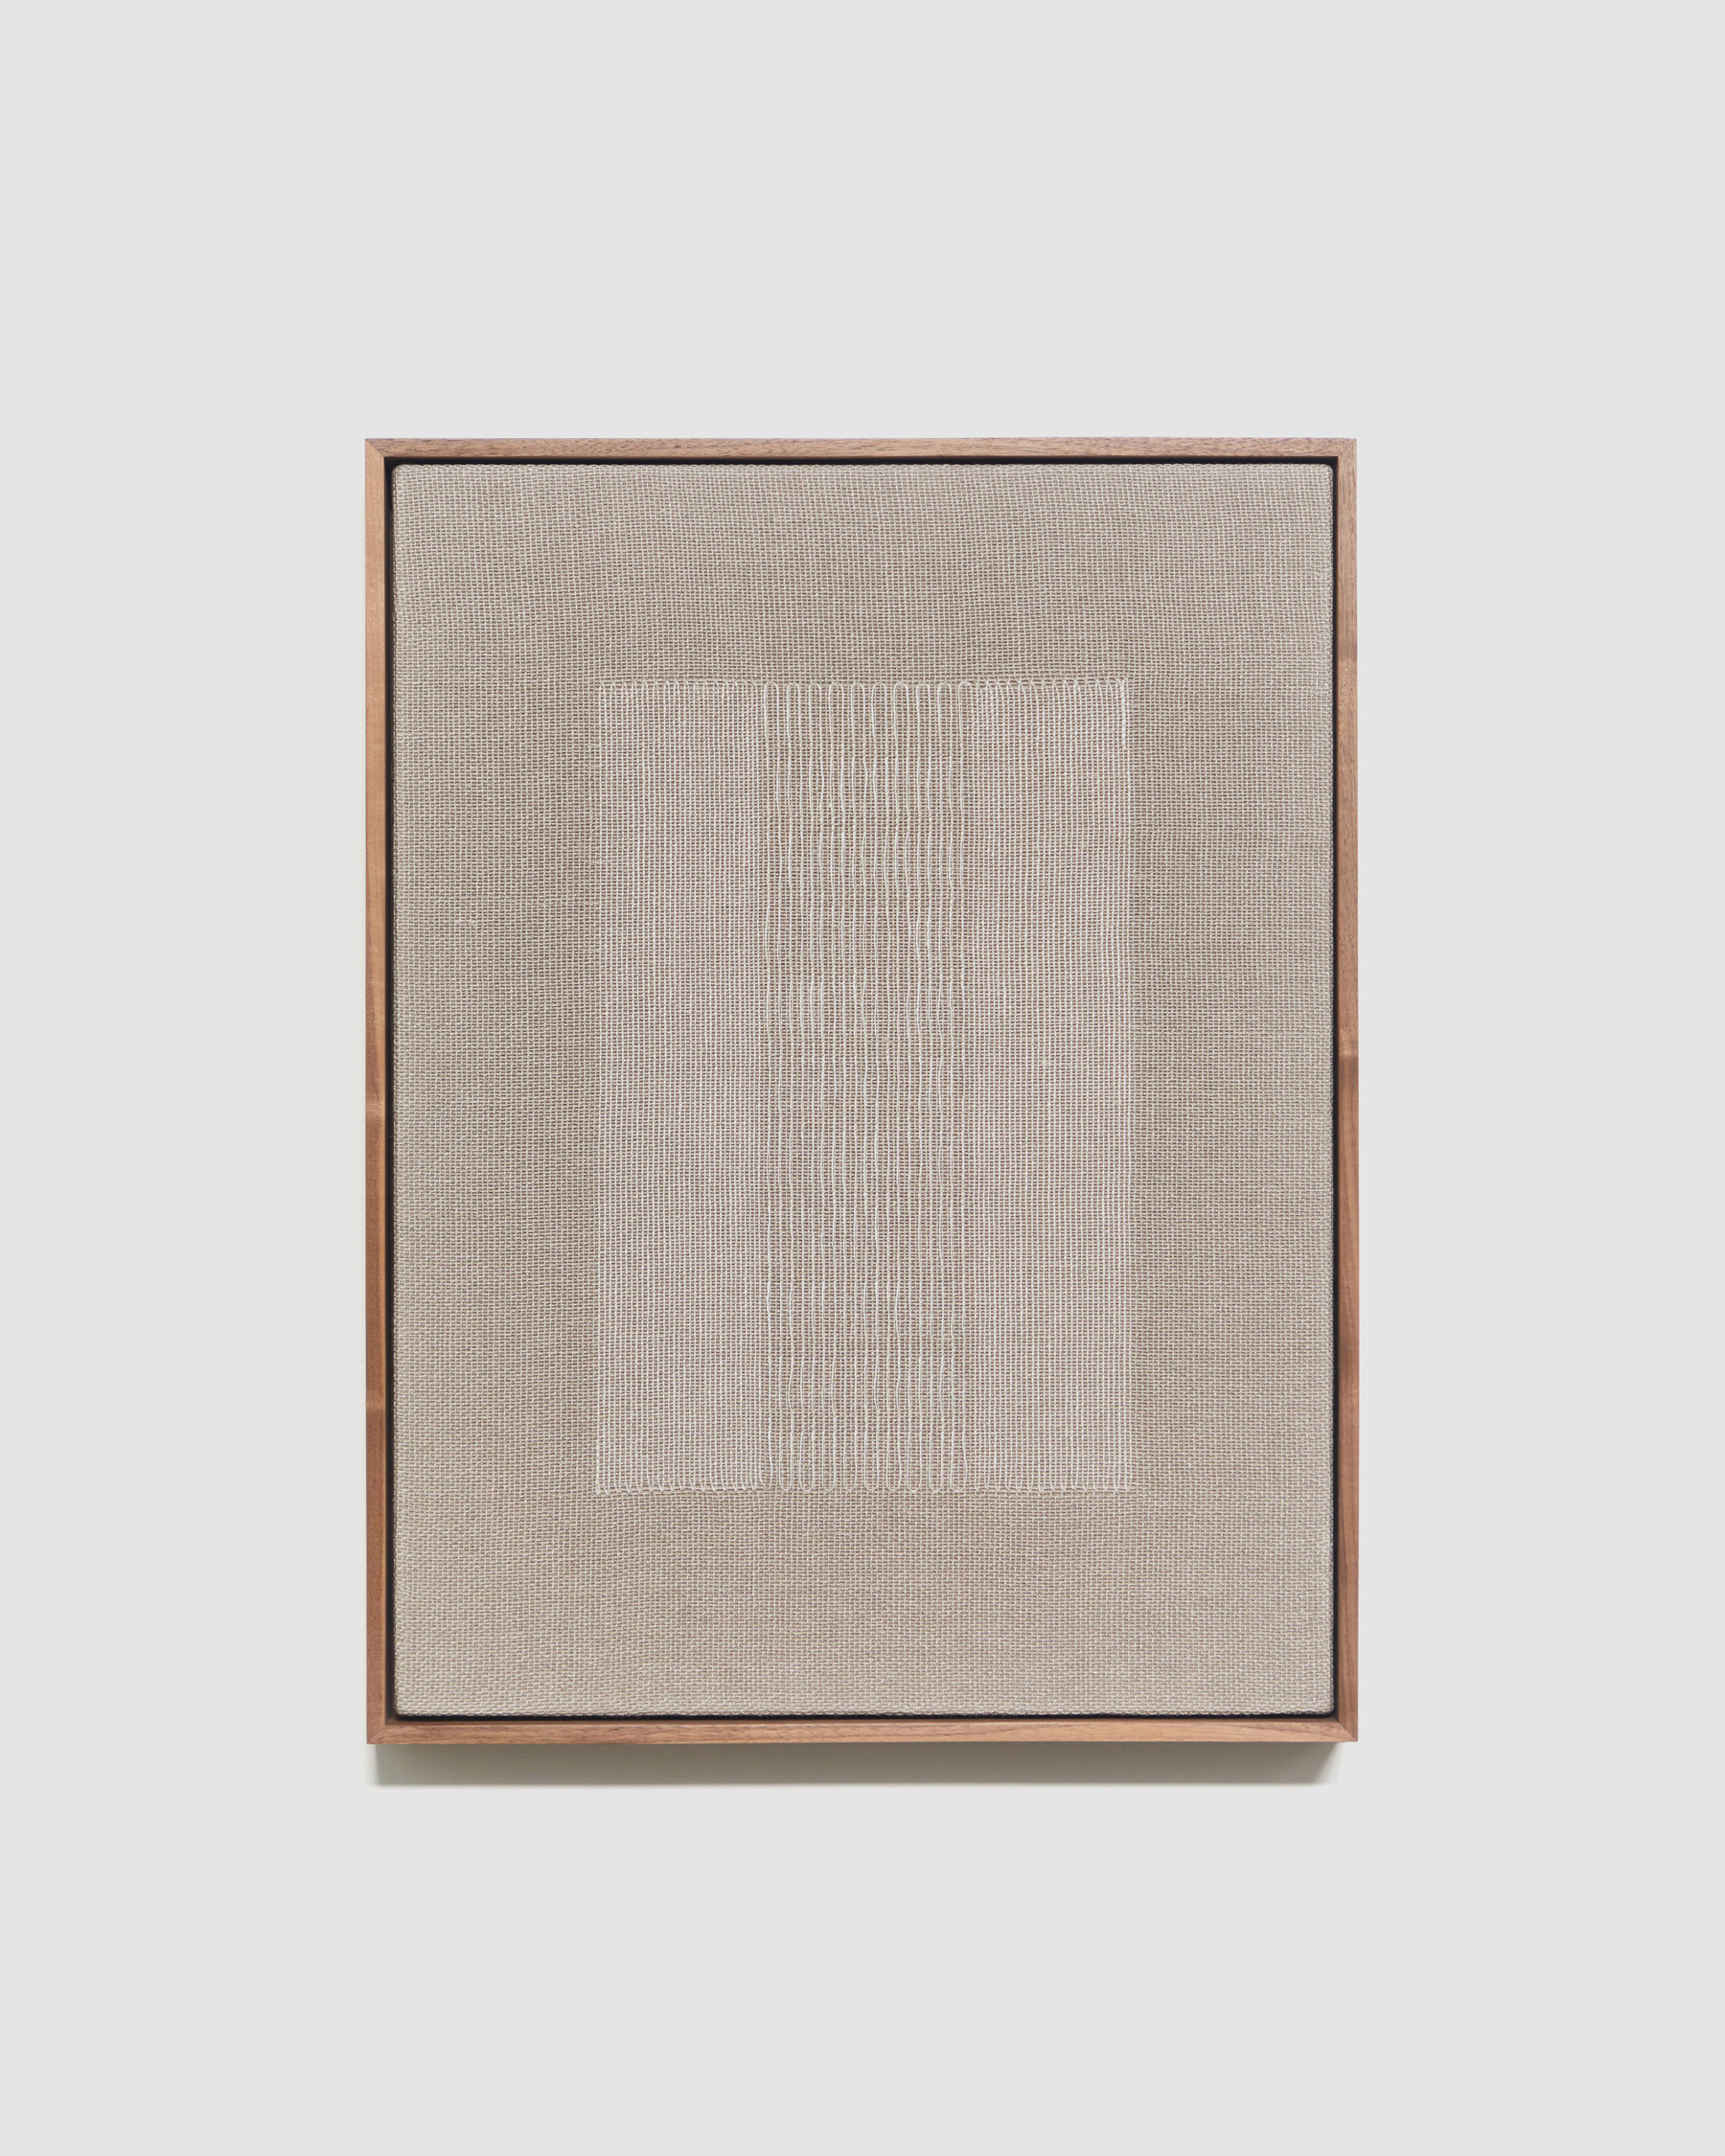 Rachel DuVall, White Weave and Dash On Natural, Hand woven linen, 2022, ca. 45 x 60cm © The Artist